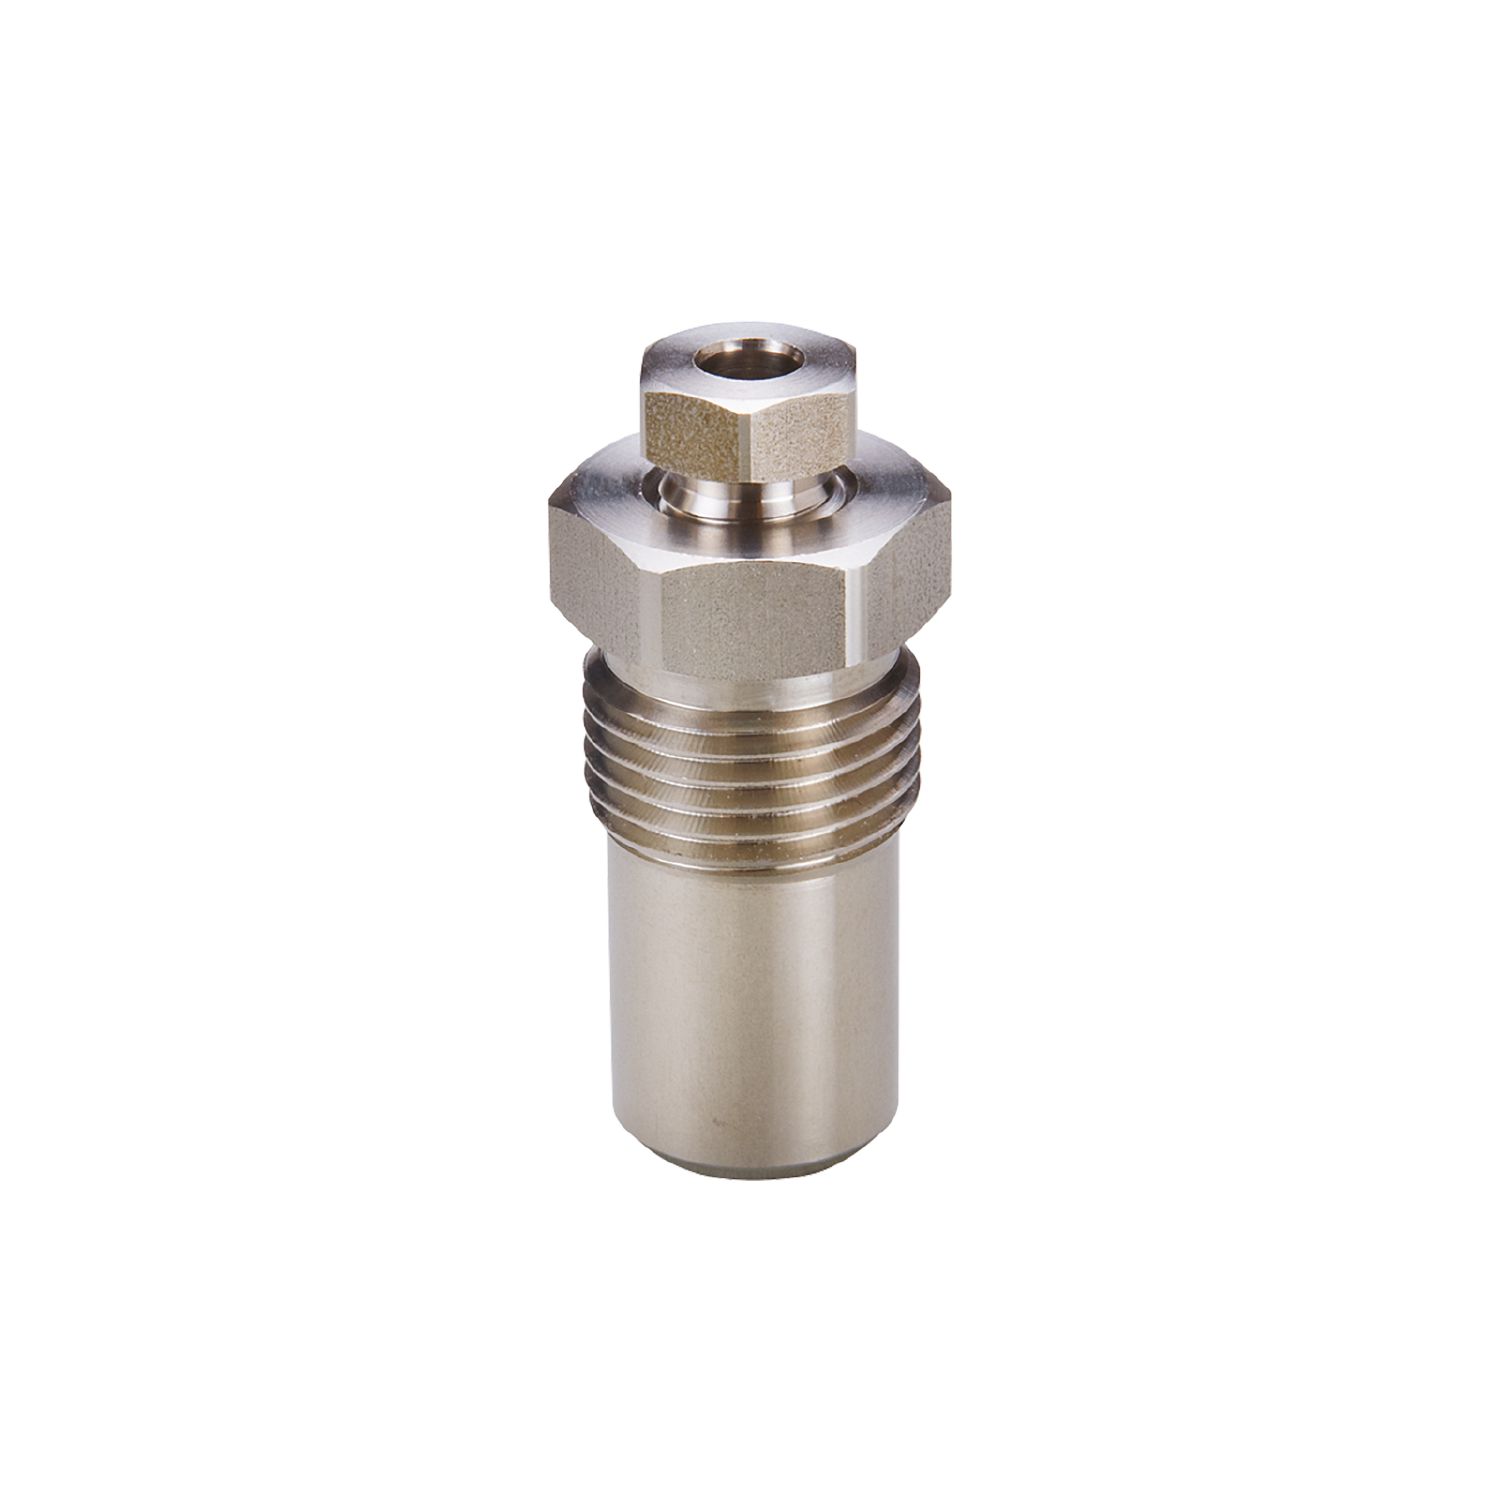 E30144 - Clamp fitting for process sensors - ifm